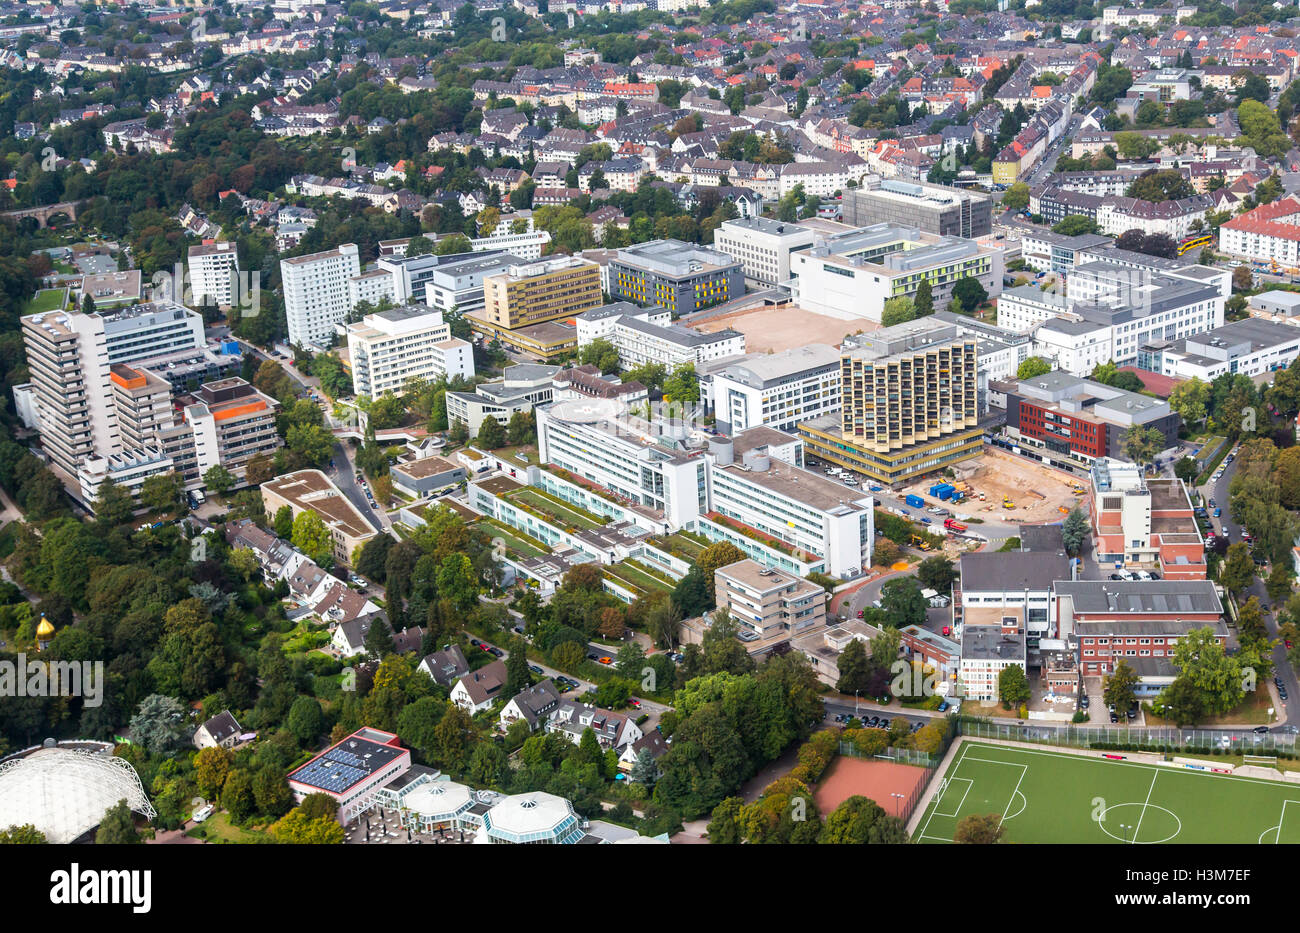 Areal shot of the city of Essen, Germany, city center, downtown area, University hospital clinic area, Stock Photo